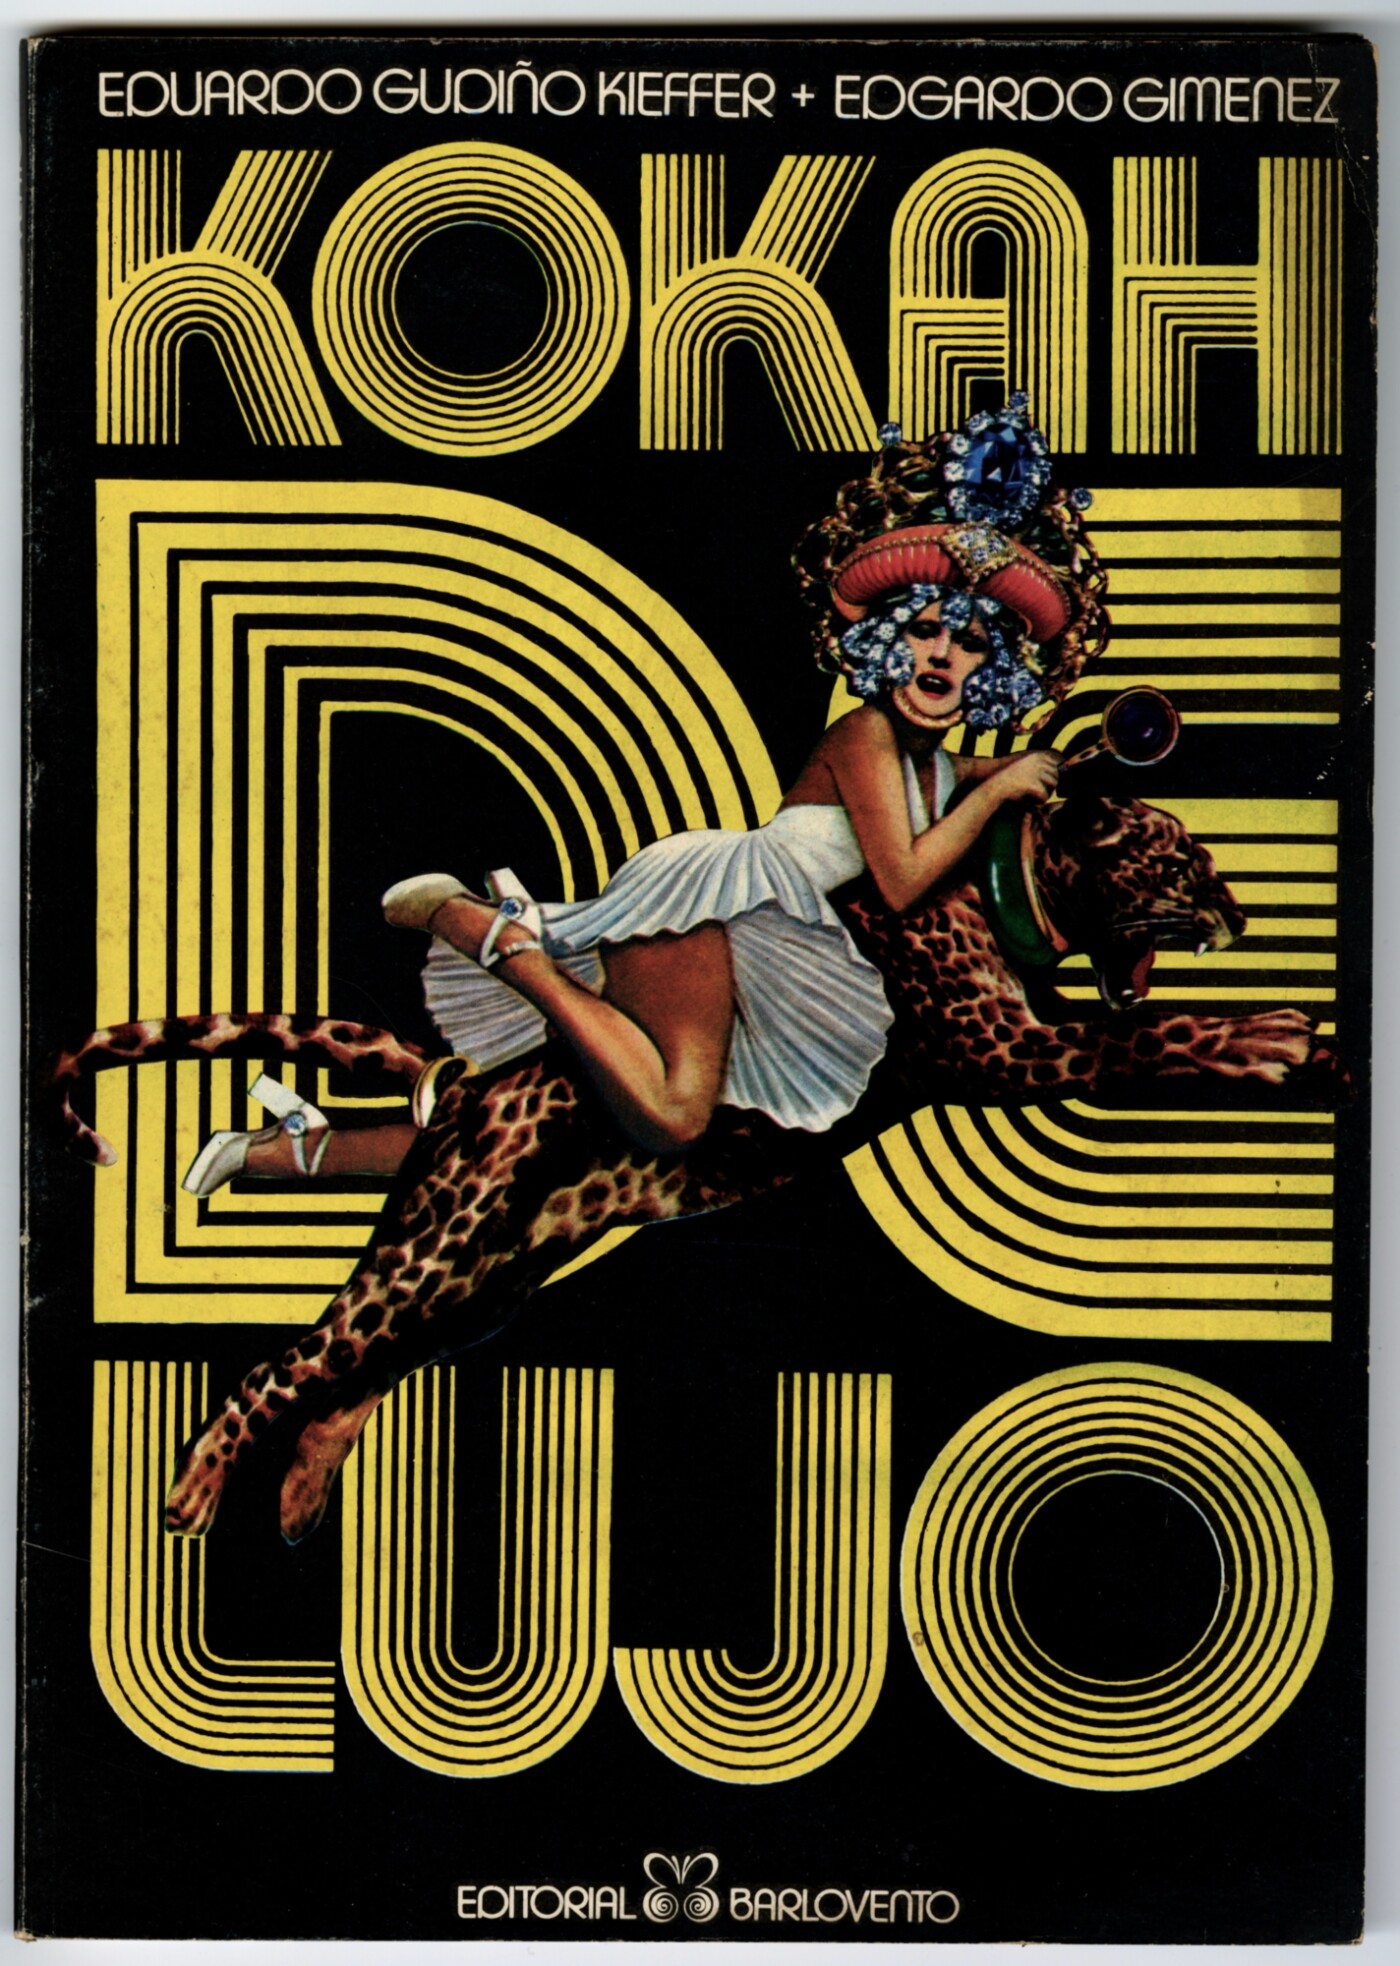 The cover of a book, oriented vertically, displays its title, “Kokah de Lujo,” in large yellow, bold 1970s lettering against a black background, filling almost the entire cover. Above the title are the names of the authors, “Eduardo Gudiño Kieffer + Edgardo Giménez.” At the center, covering part of the title, is an illustrated figure wearing a headdress with gemstones, a white pleated skirt, and white heels. The figure rides a snarling leopard that appears to soar in a single bound from the bottom left corner of the image. Below the title is the logo and name of the book’s publisher, “Editorial Barlovento.”